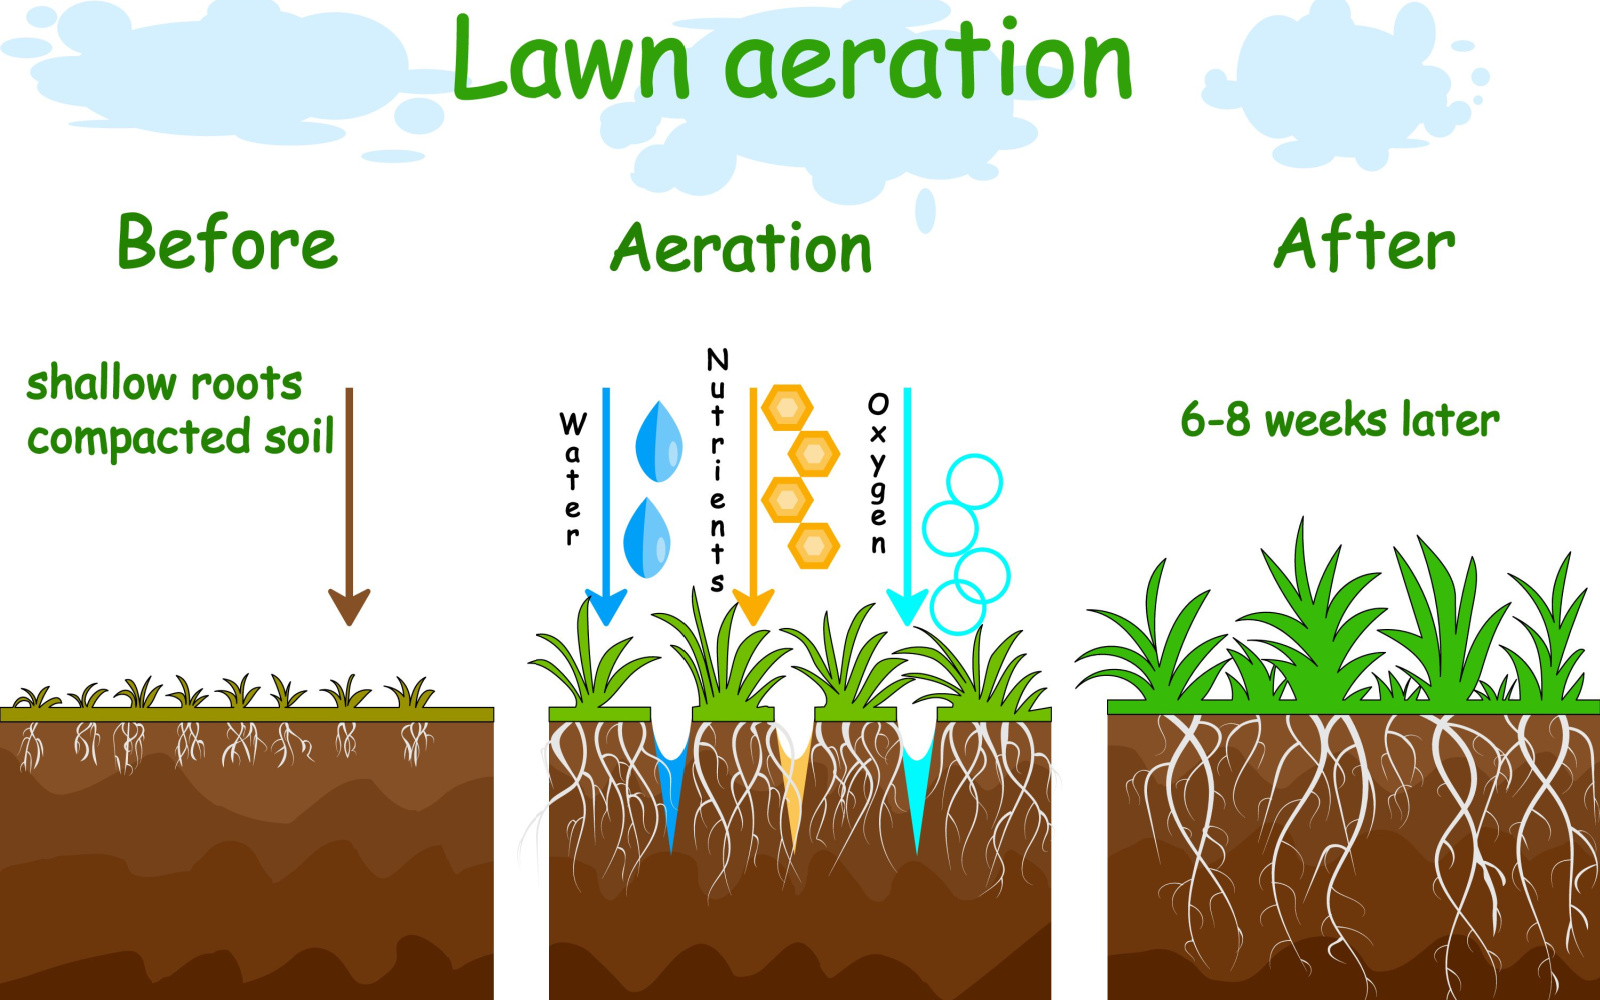 Lawn Aeration Near Me | St. Louis Lawn Care Services | Lawn Sprinklers of St. Louis